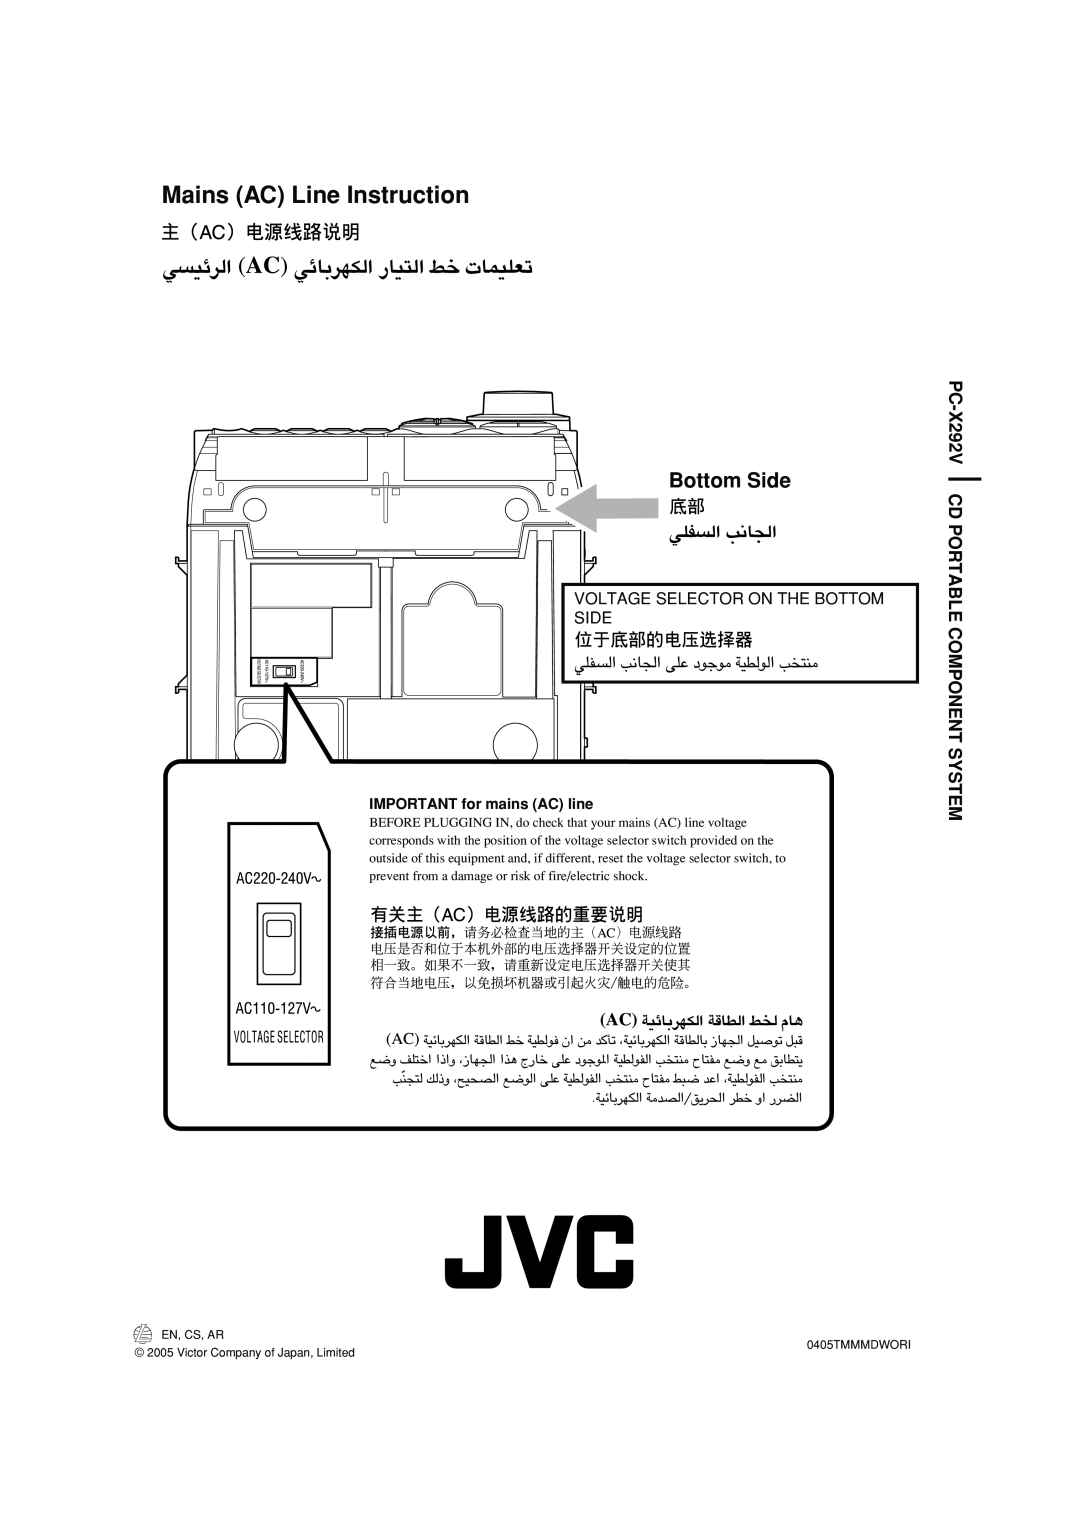 JVC manual Mains AC Line Instruction, Bottom Side, PC-X292VCD PORTABLE COMPONENT SYSTEM, IMPORTANT for mains AC line 